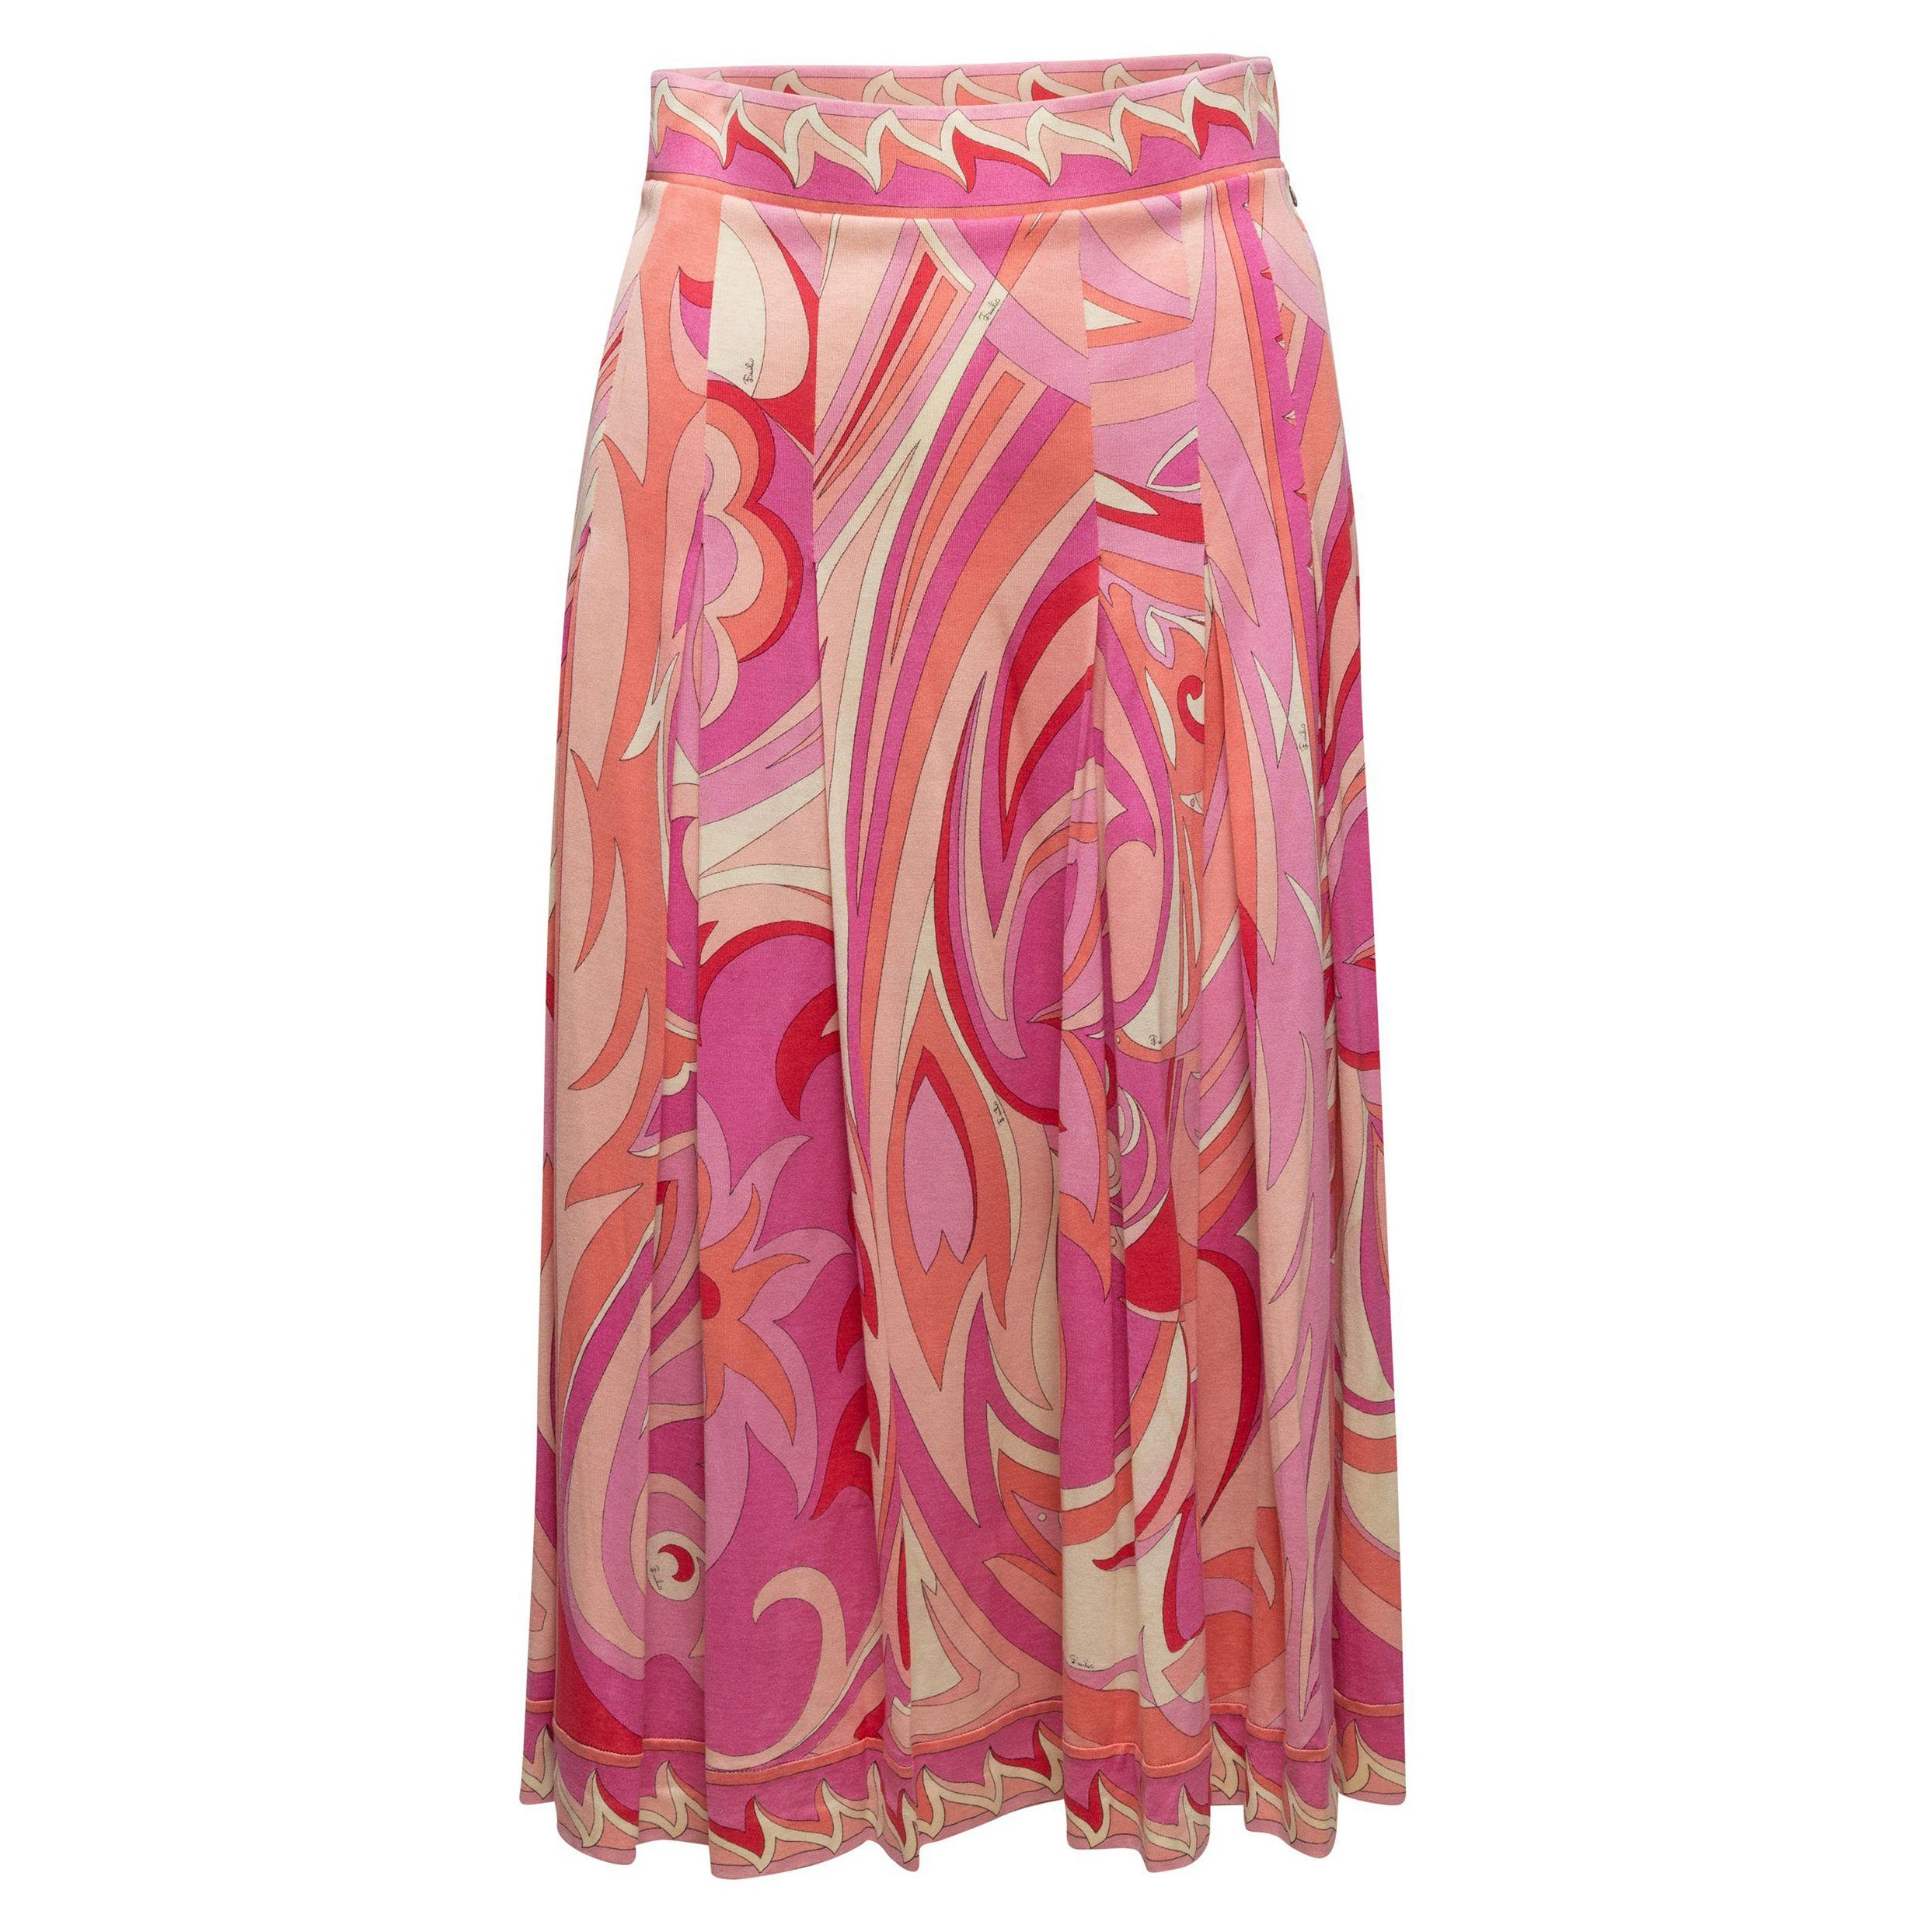 Emilio Pucci Pink & White 60s Abstract Print Pleated Skirt